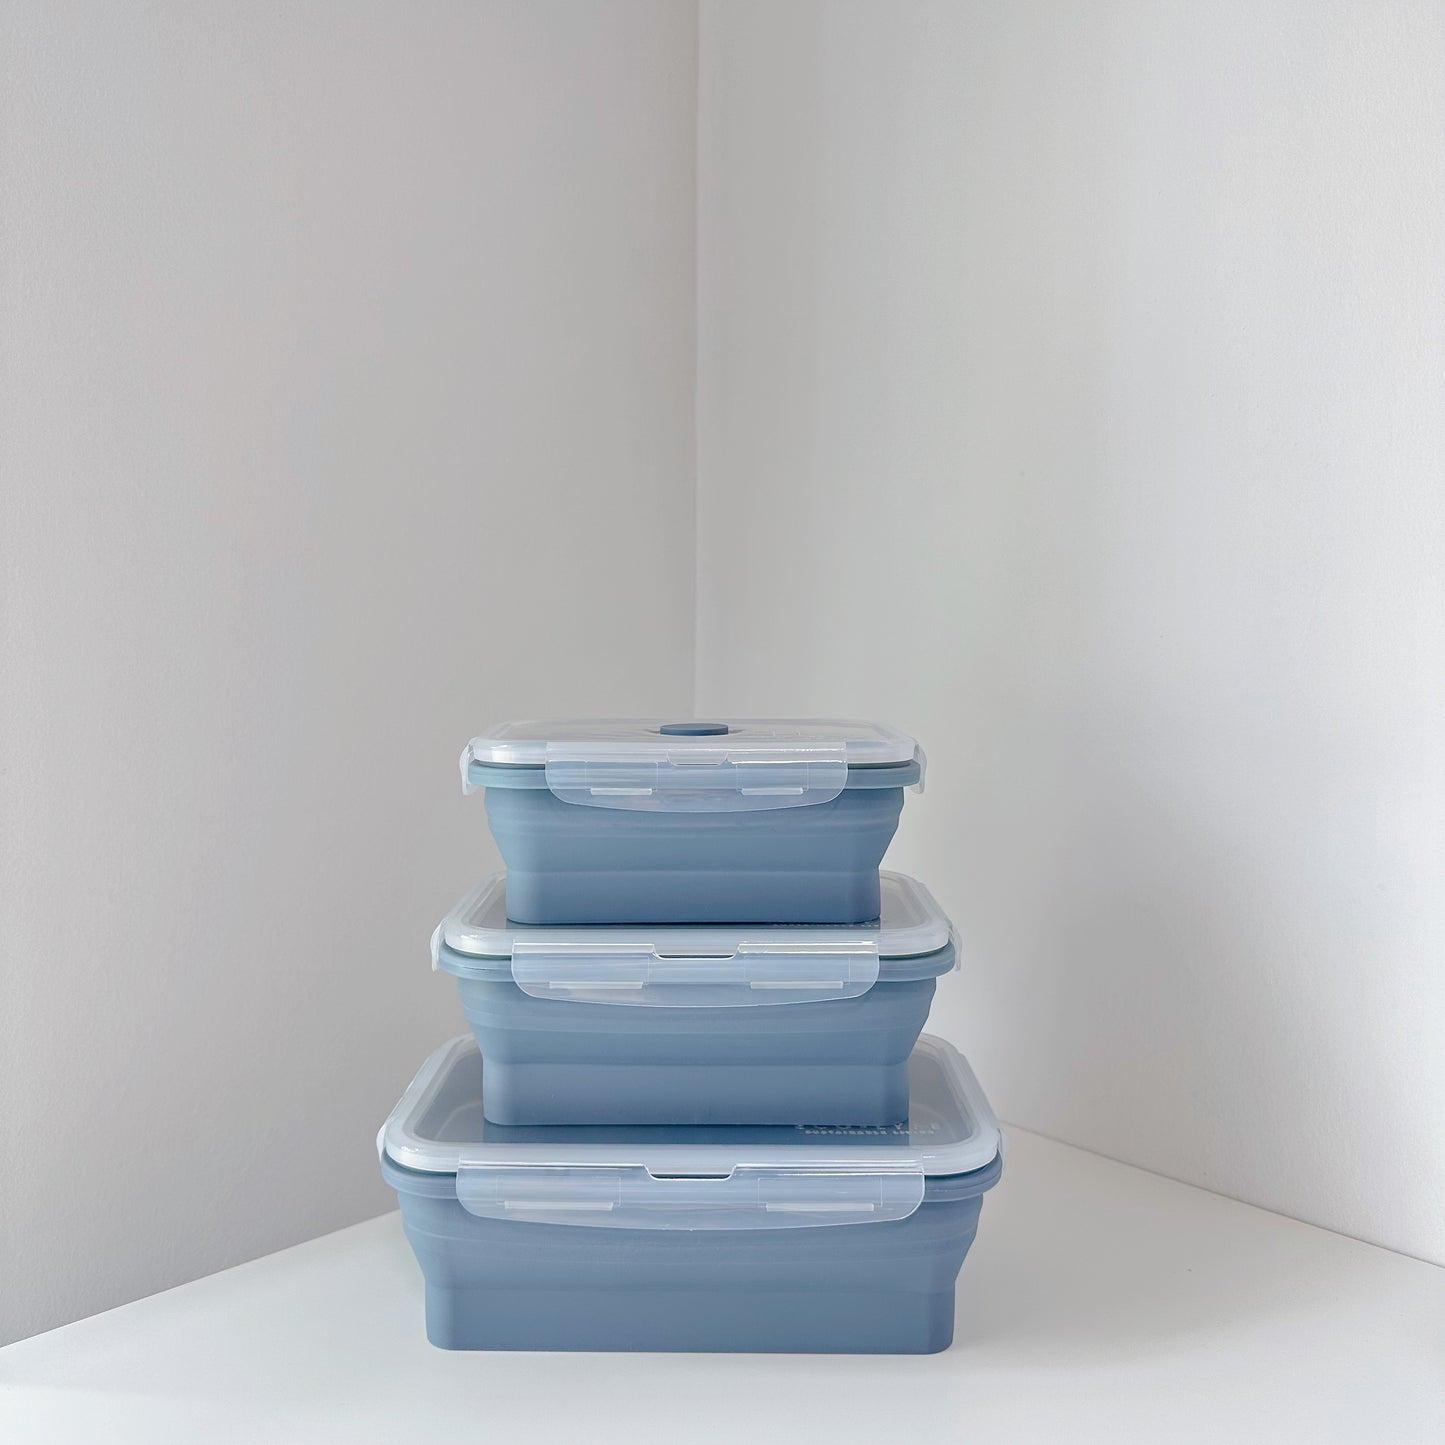 [Eco-Lyfe] Collapsible Silicone Lunchbox